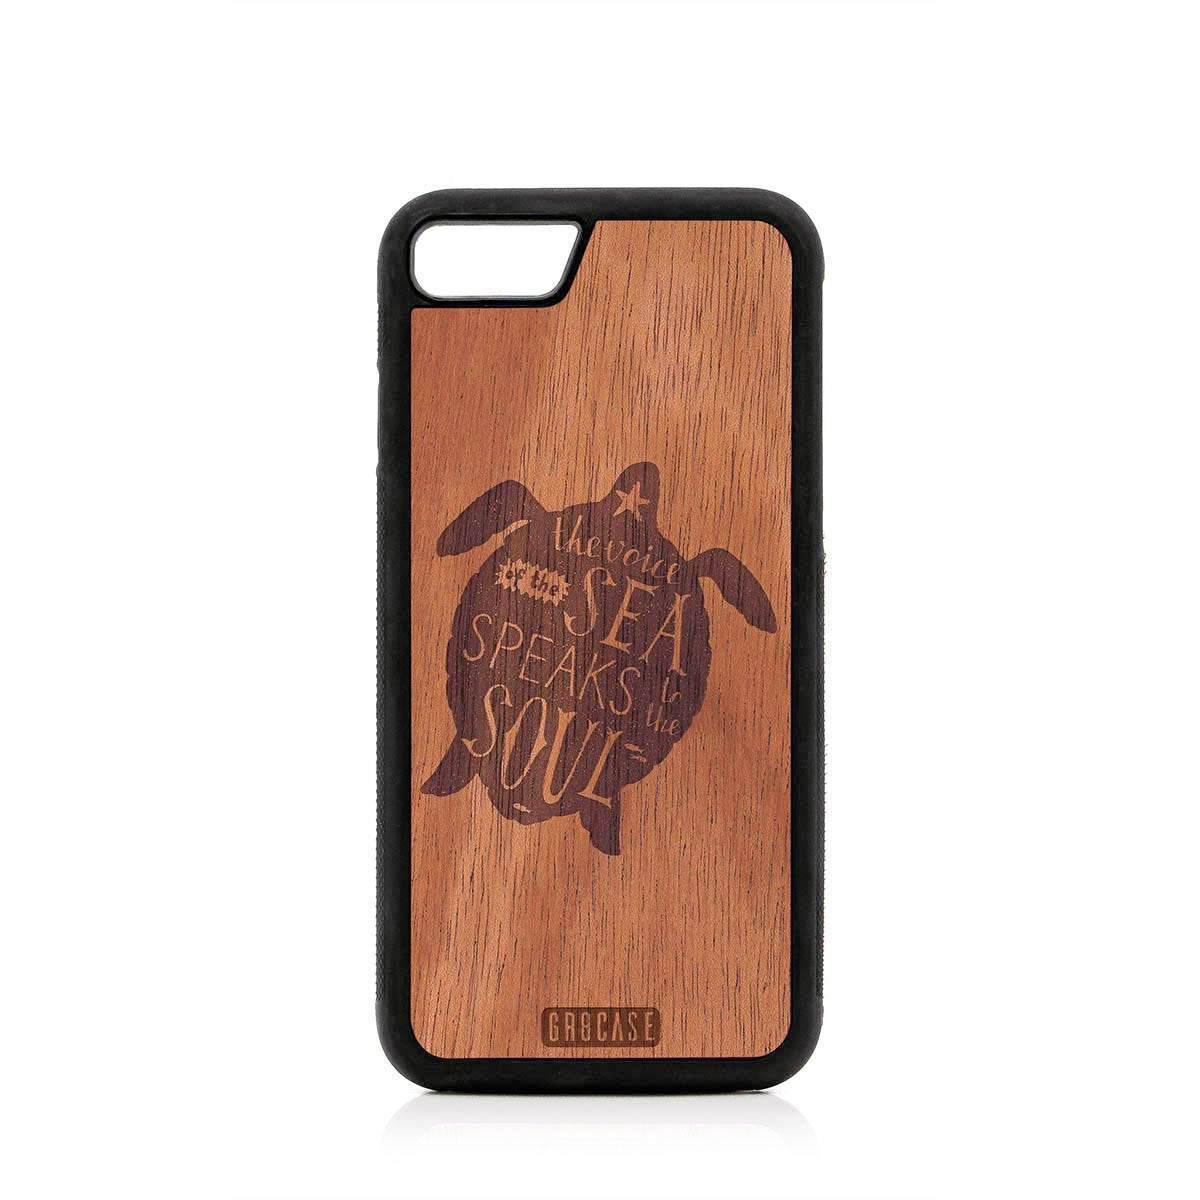 The Voice Of The Sea Speaks To The Soul (Turtle) Design Wood Case For iPhone SE 2020